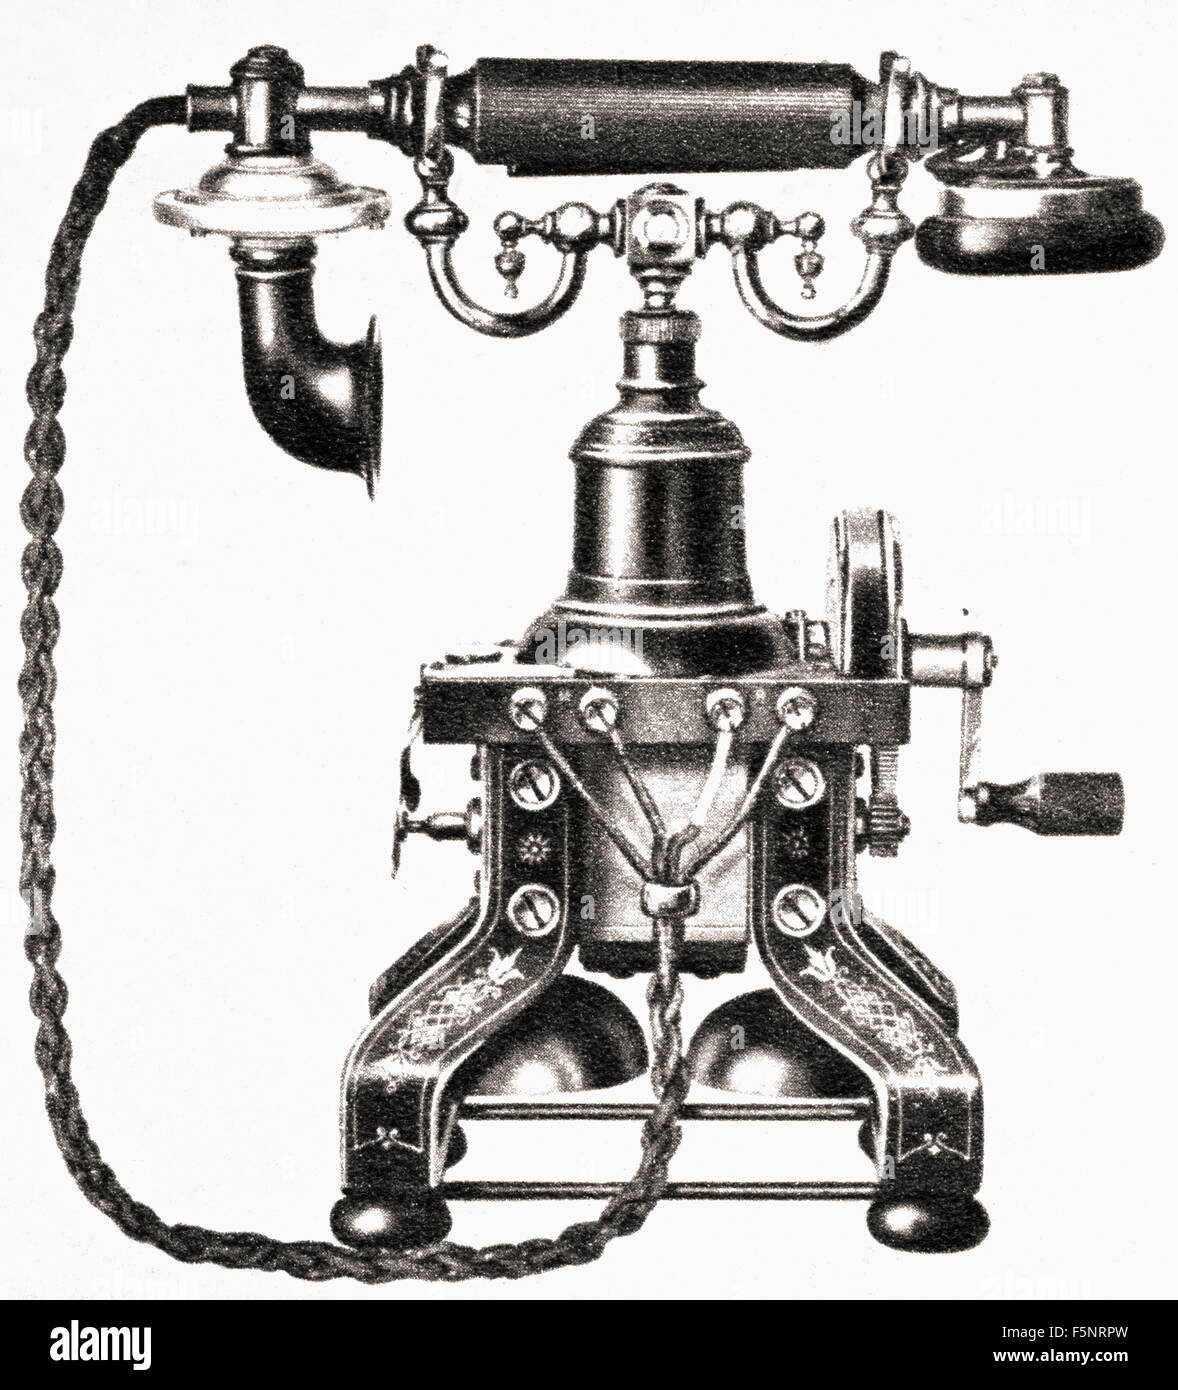 the first telephone invented